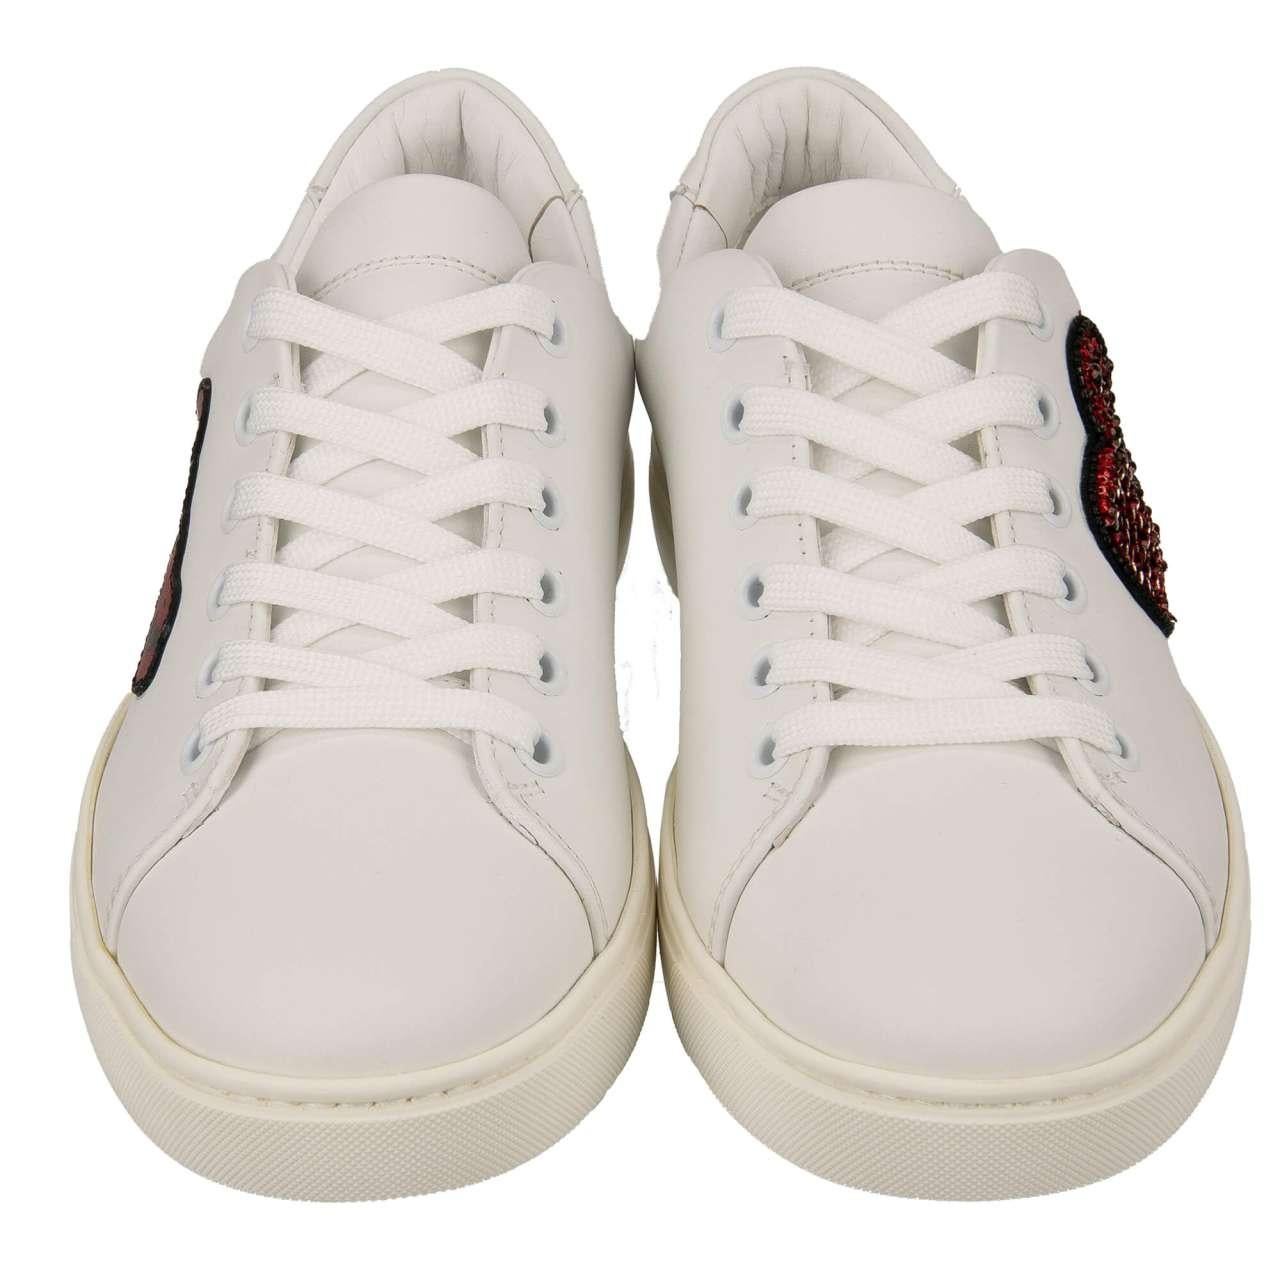 - Leather Sneaker LONDON with crystal heart and Love embroidered patches in white by DOLCE & GABBANA - New with Box - MADE IN ITALY - Model: CK0167-B5569-8J098 - Material: 100% Calf leather - Sole: Rubber - Color: White - Crystal embroidered patch -